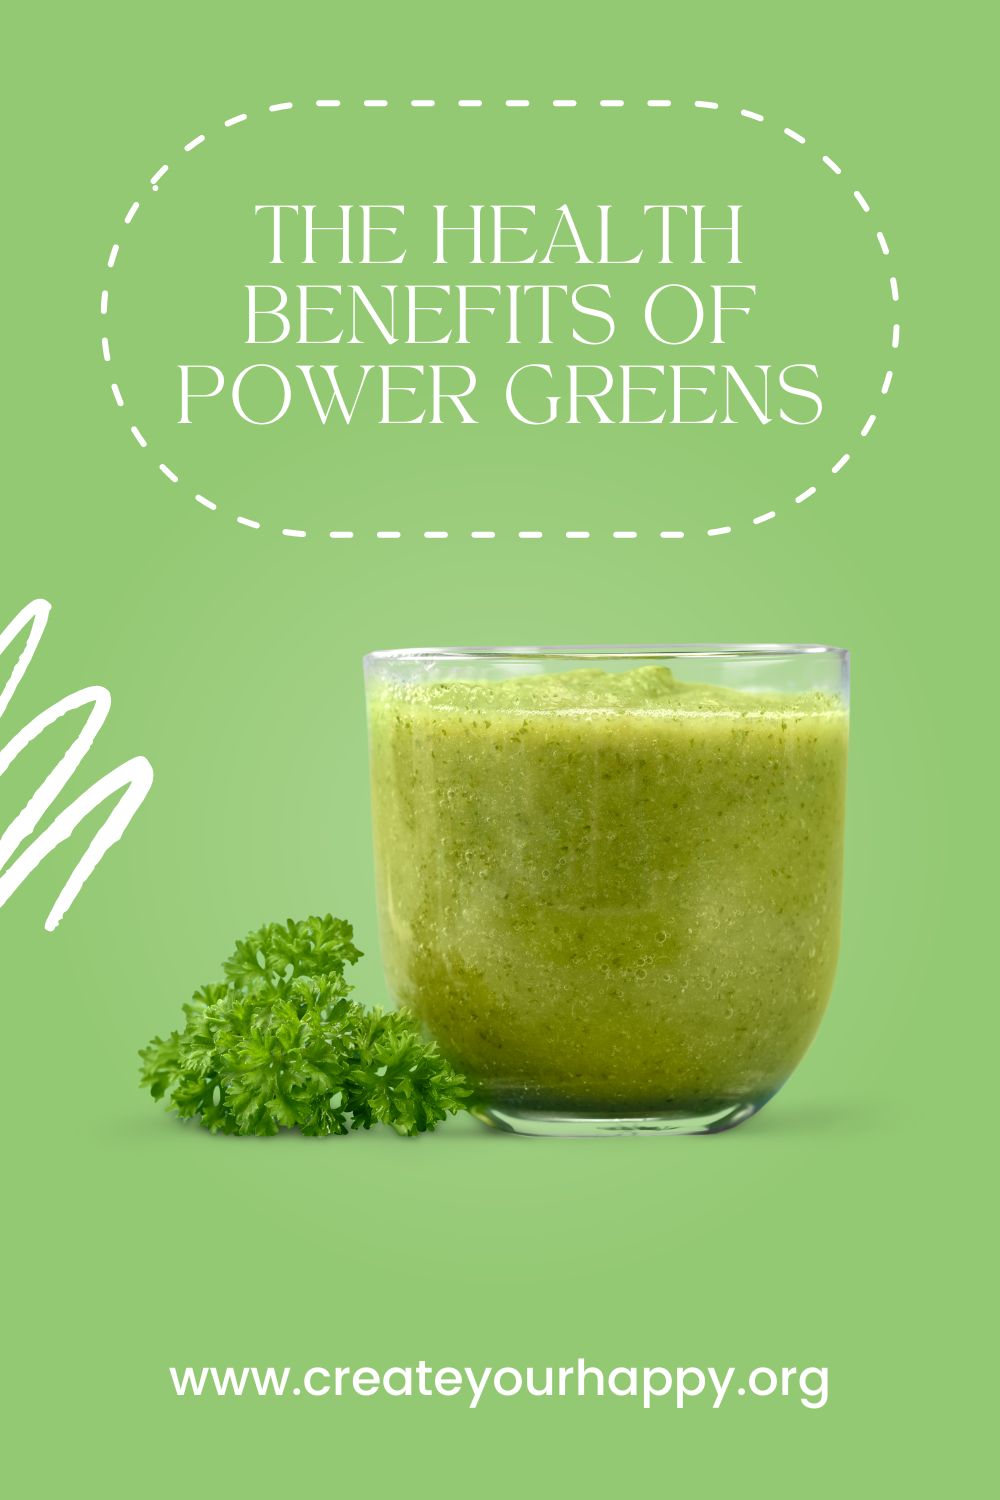 The Health Benefits of Power Greens